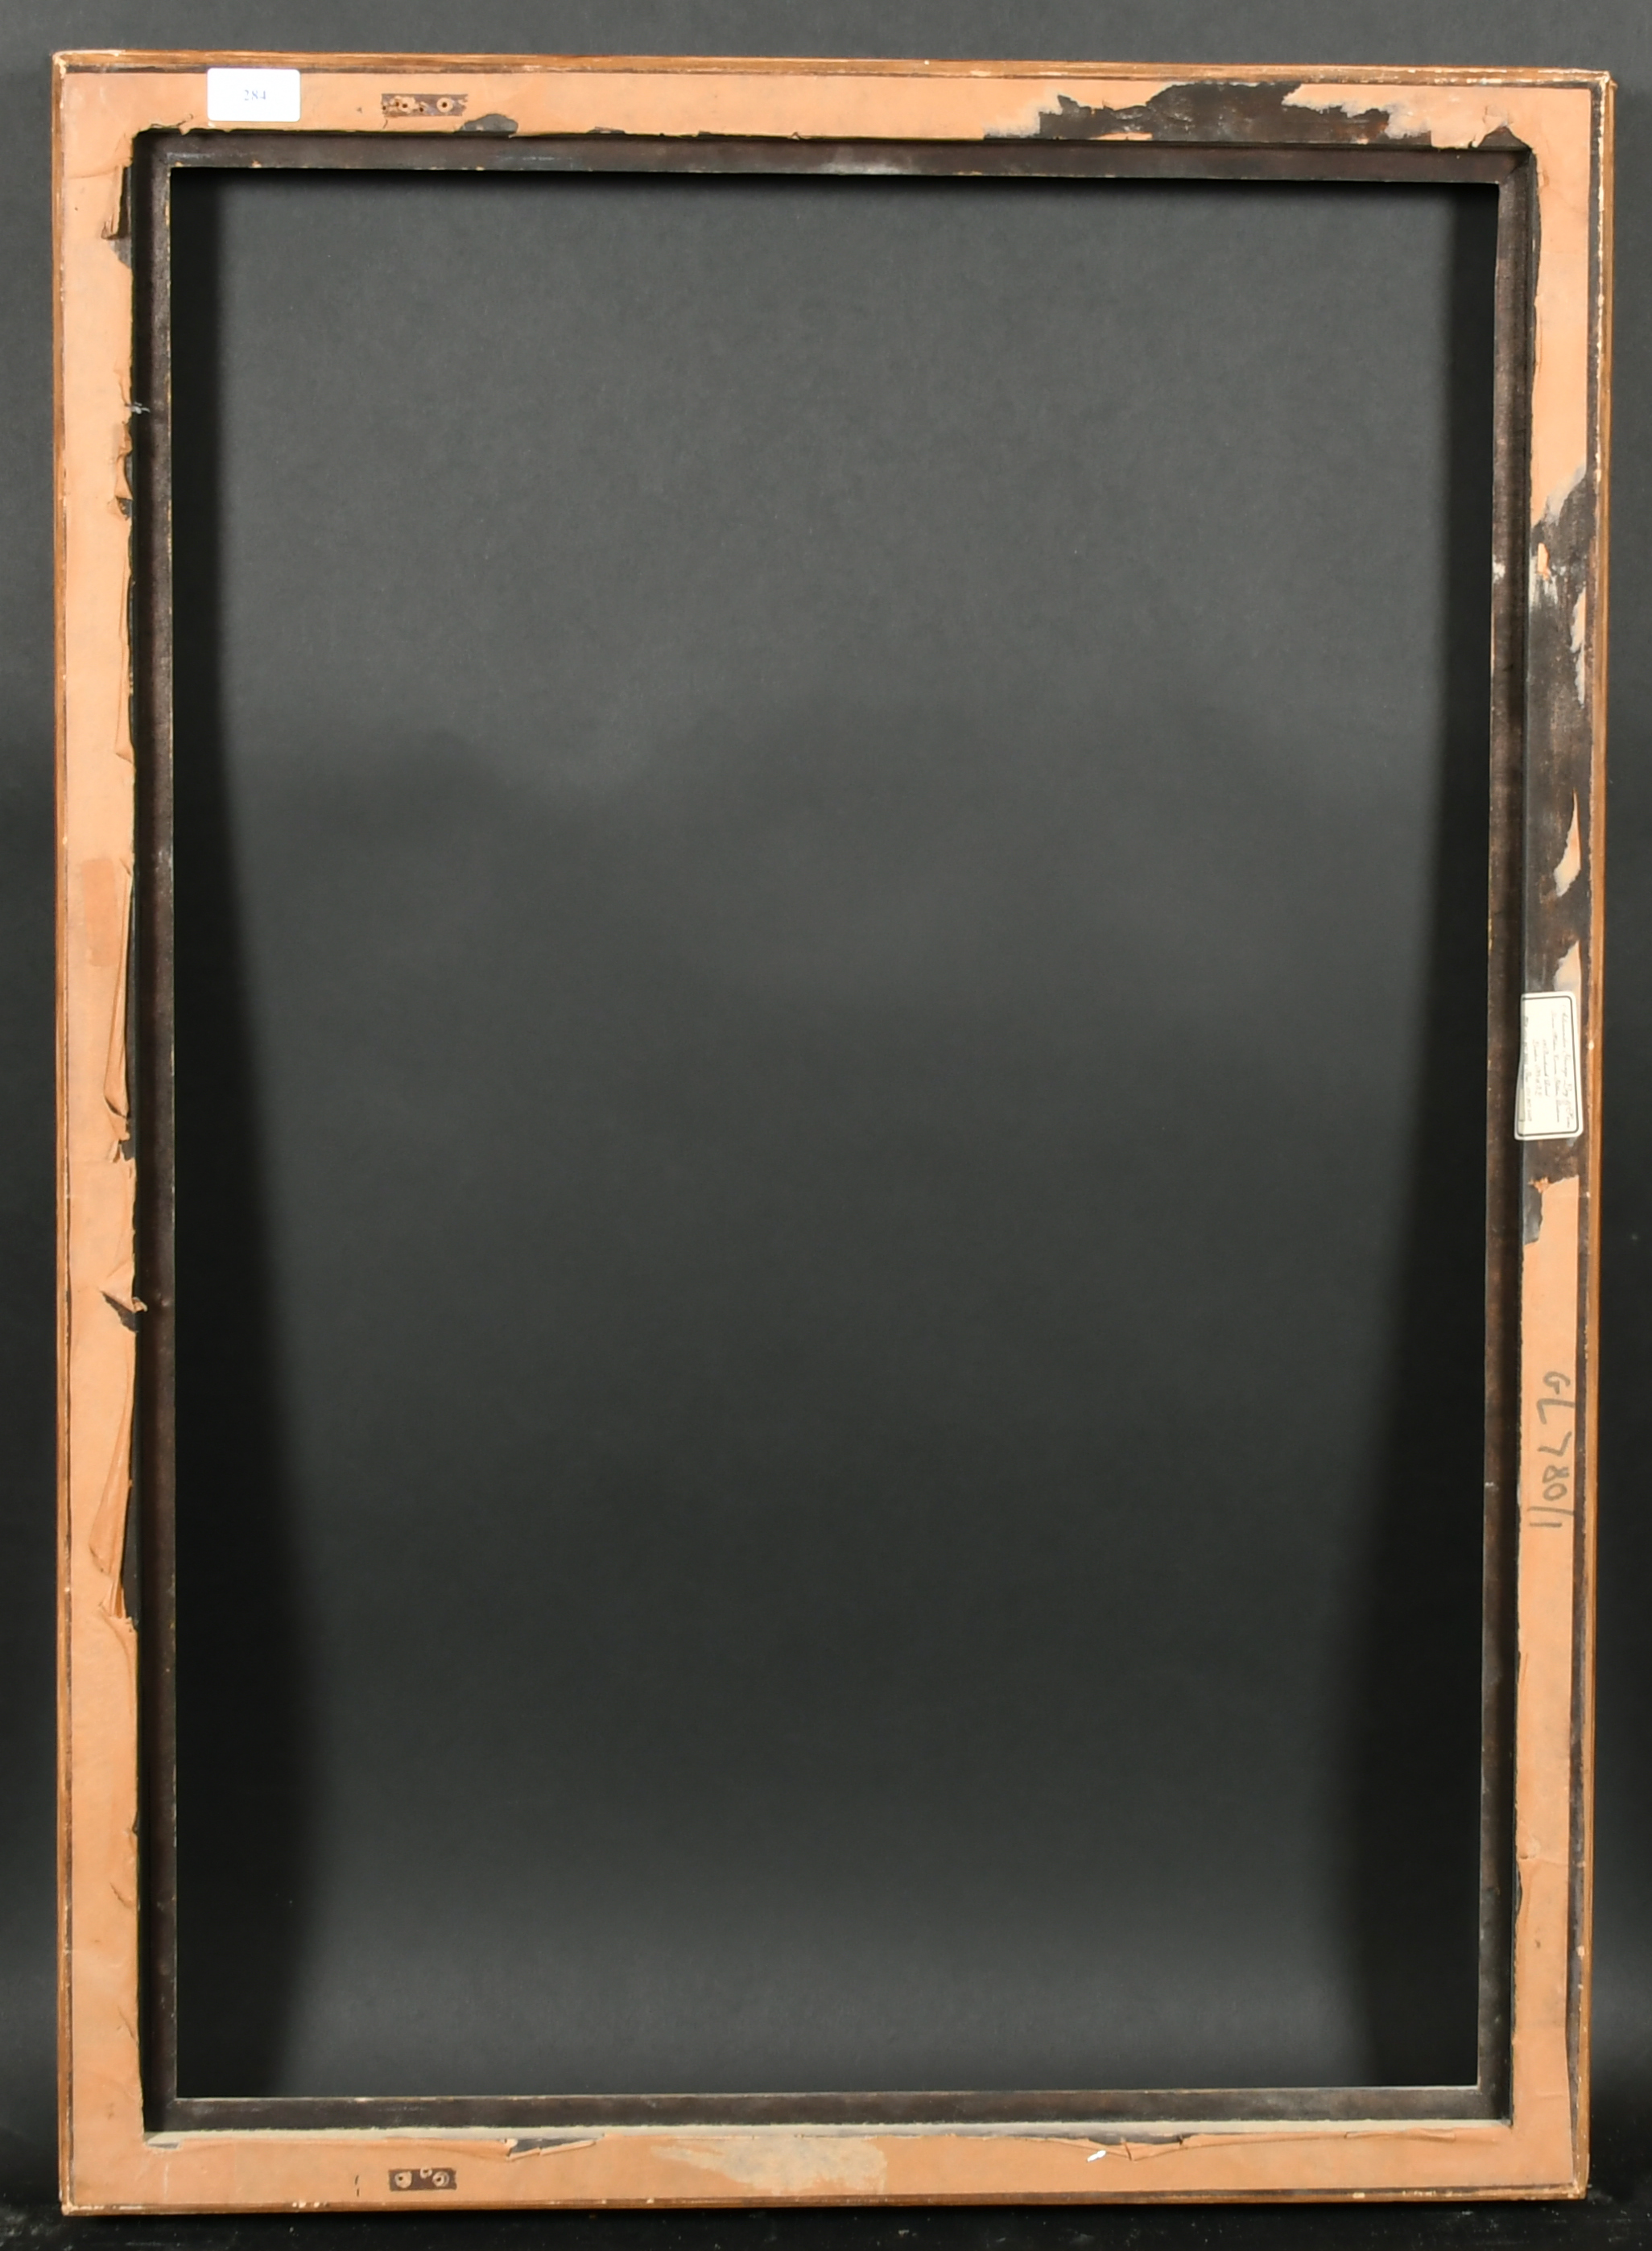 20th Century English School. A Gilt Composition Hollow Frame, rebate 33.75" x 23.25" (85.7 x 59cm) - Image 3 of 3